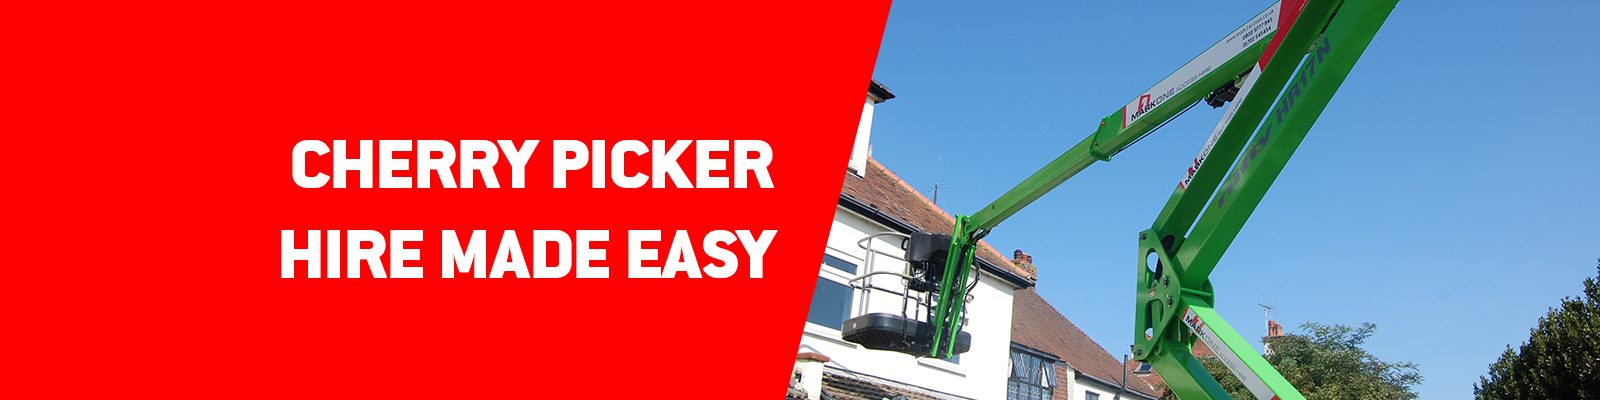 Hire a Cherry Picker in Essex with Mark One Access